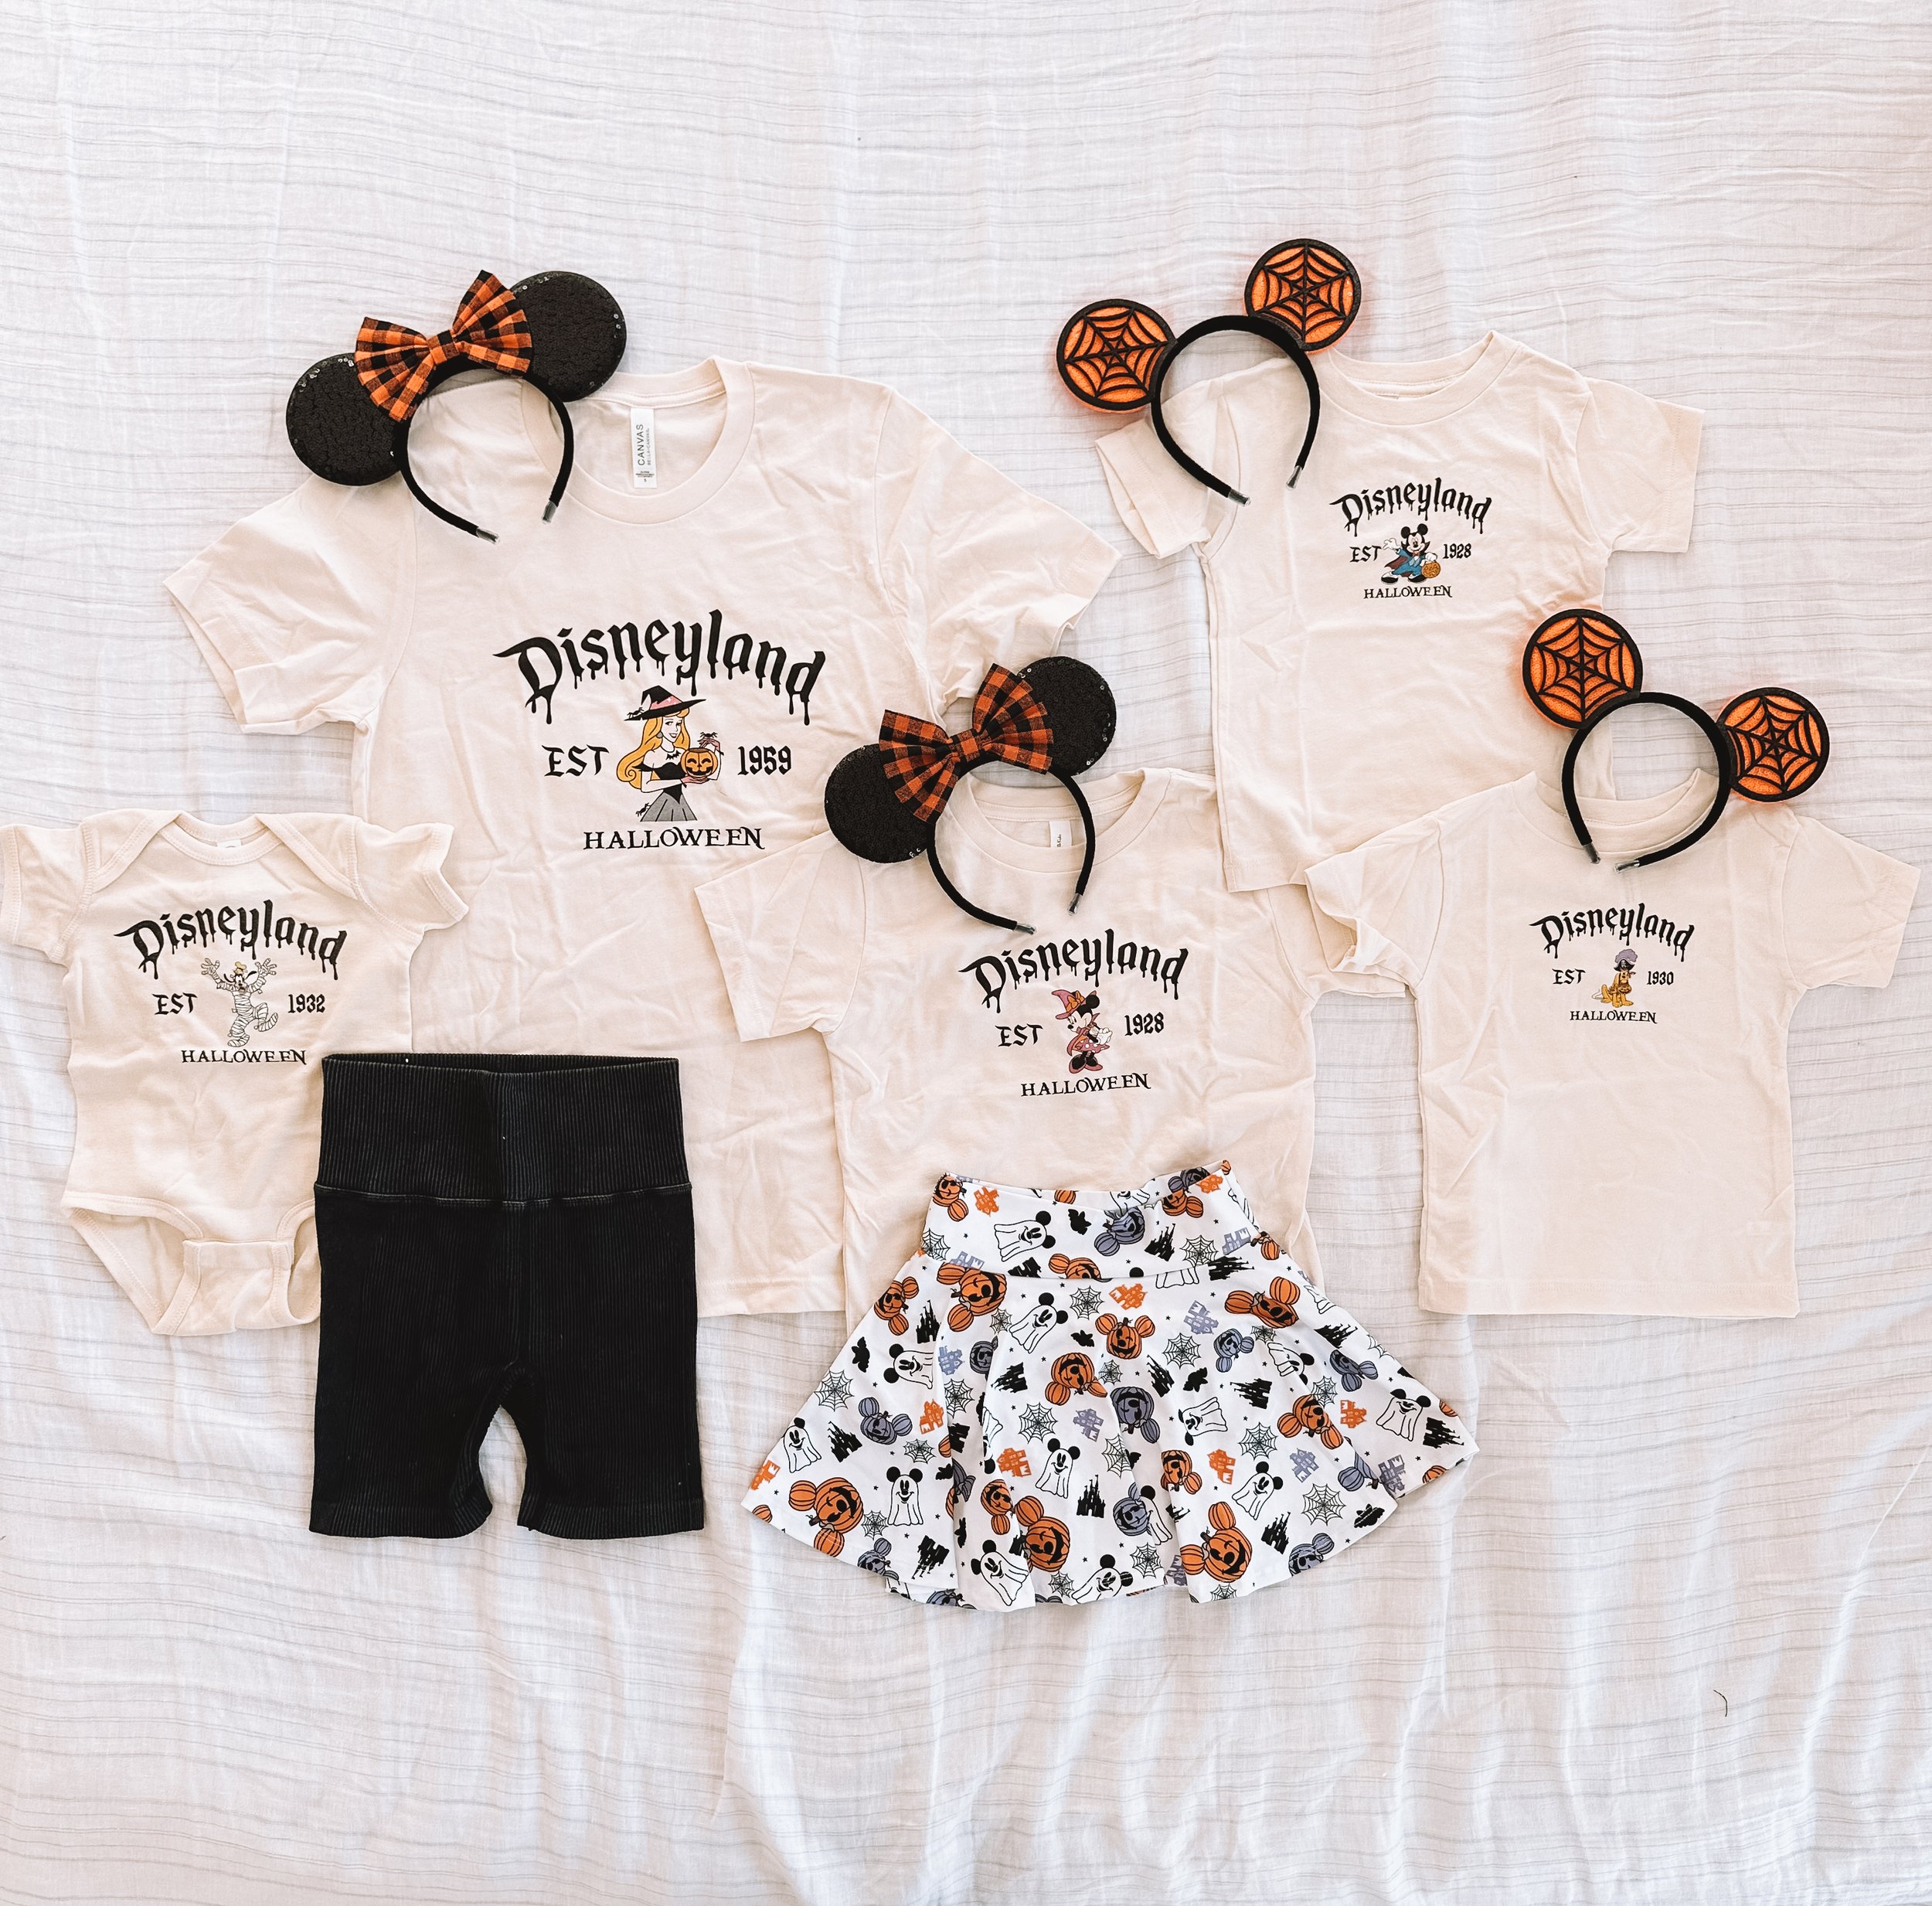 Family Disneyland Outfits at Halloween